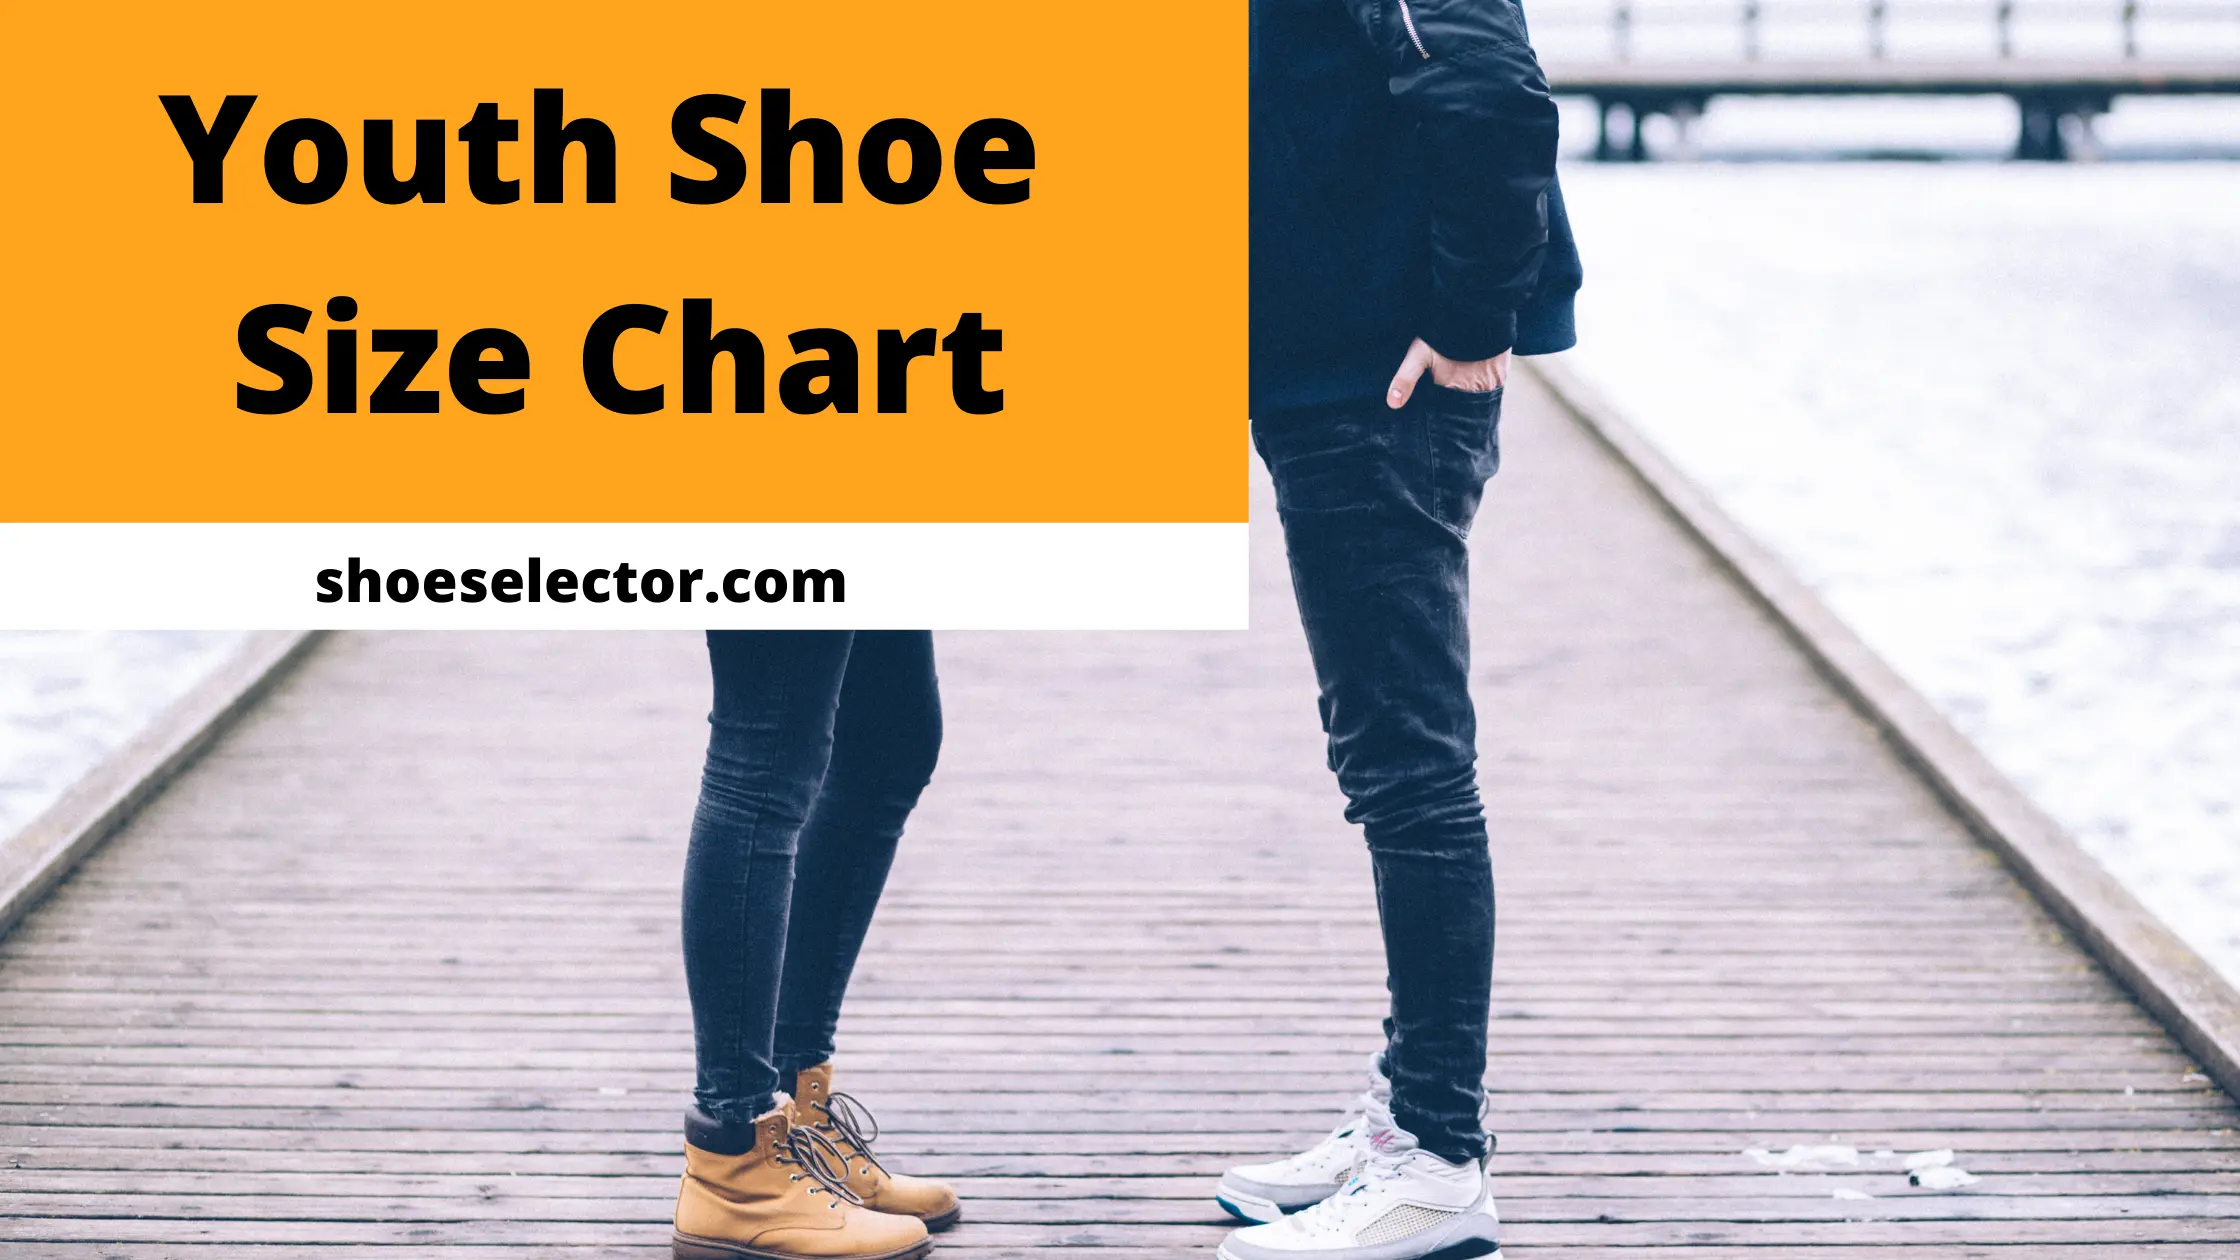 Youth Shoe Size Chart And Conversations